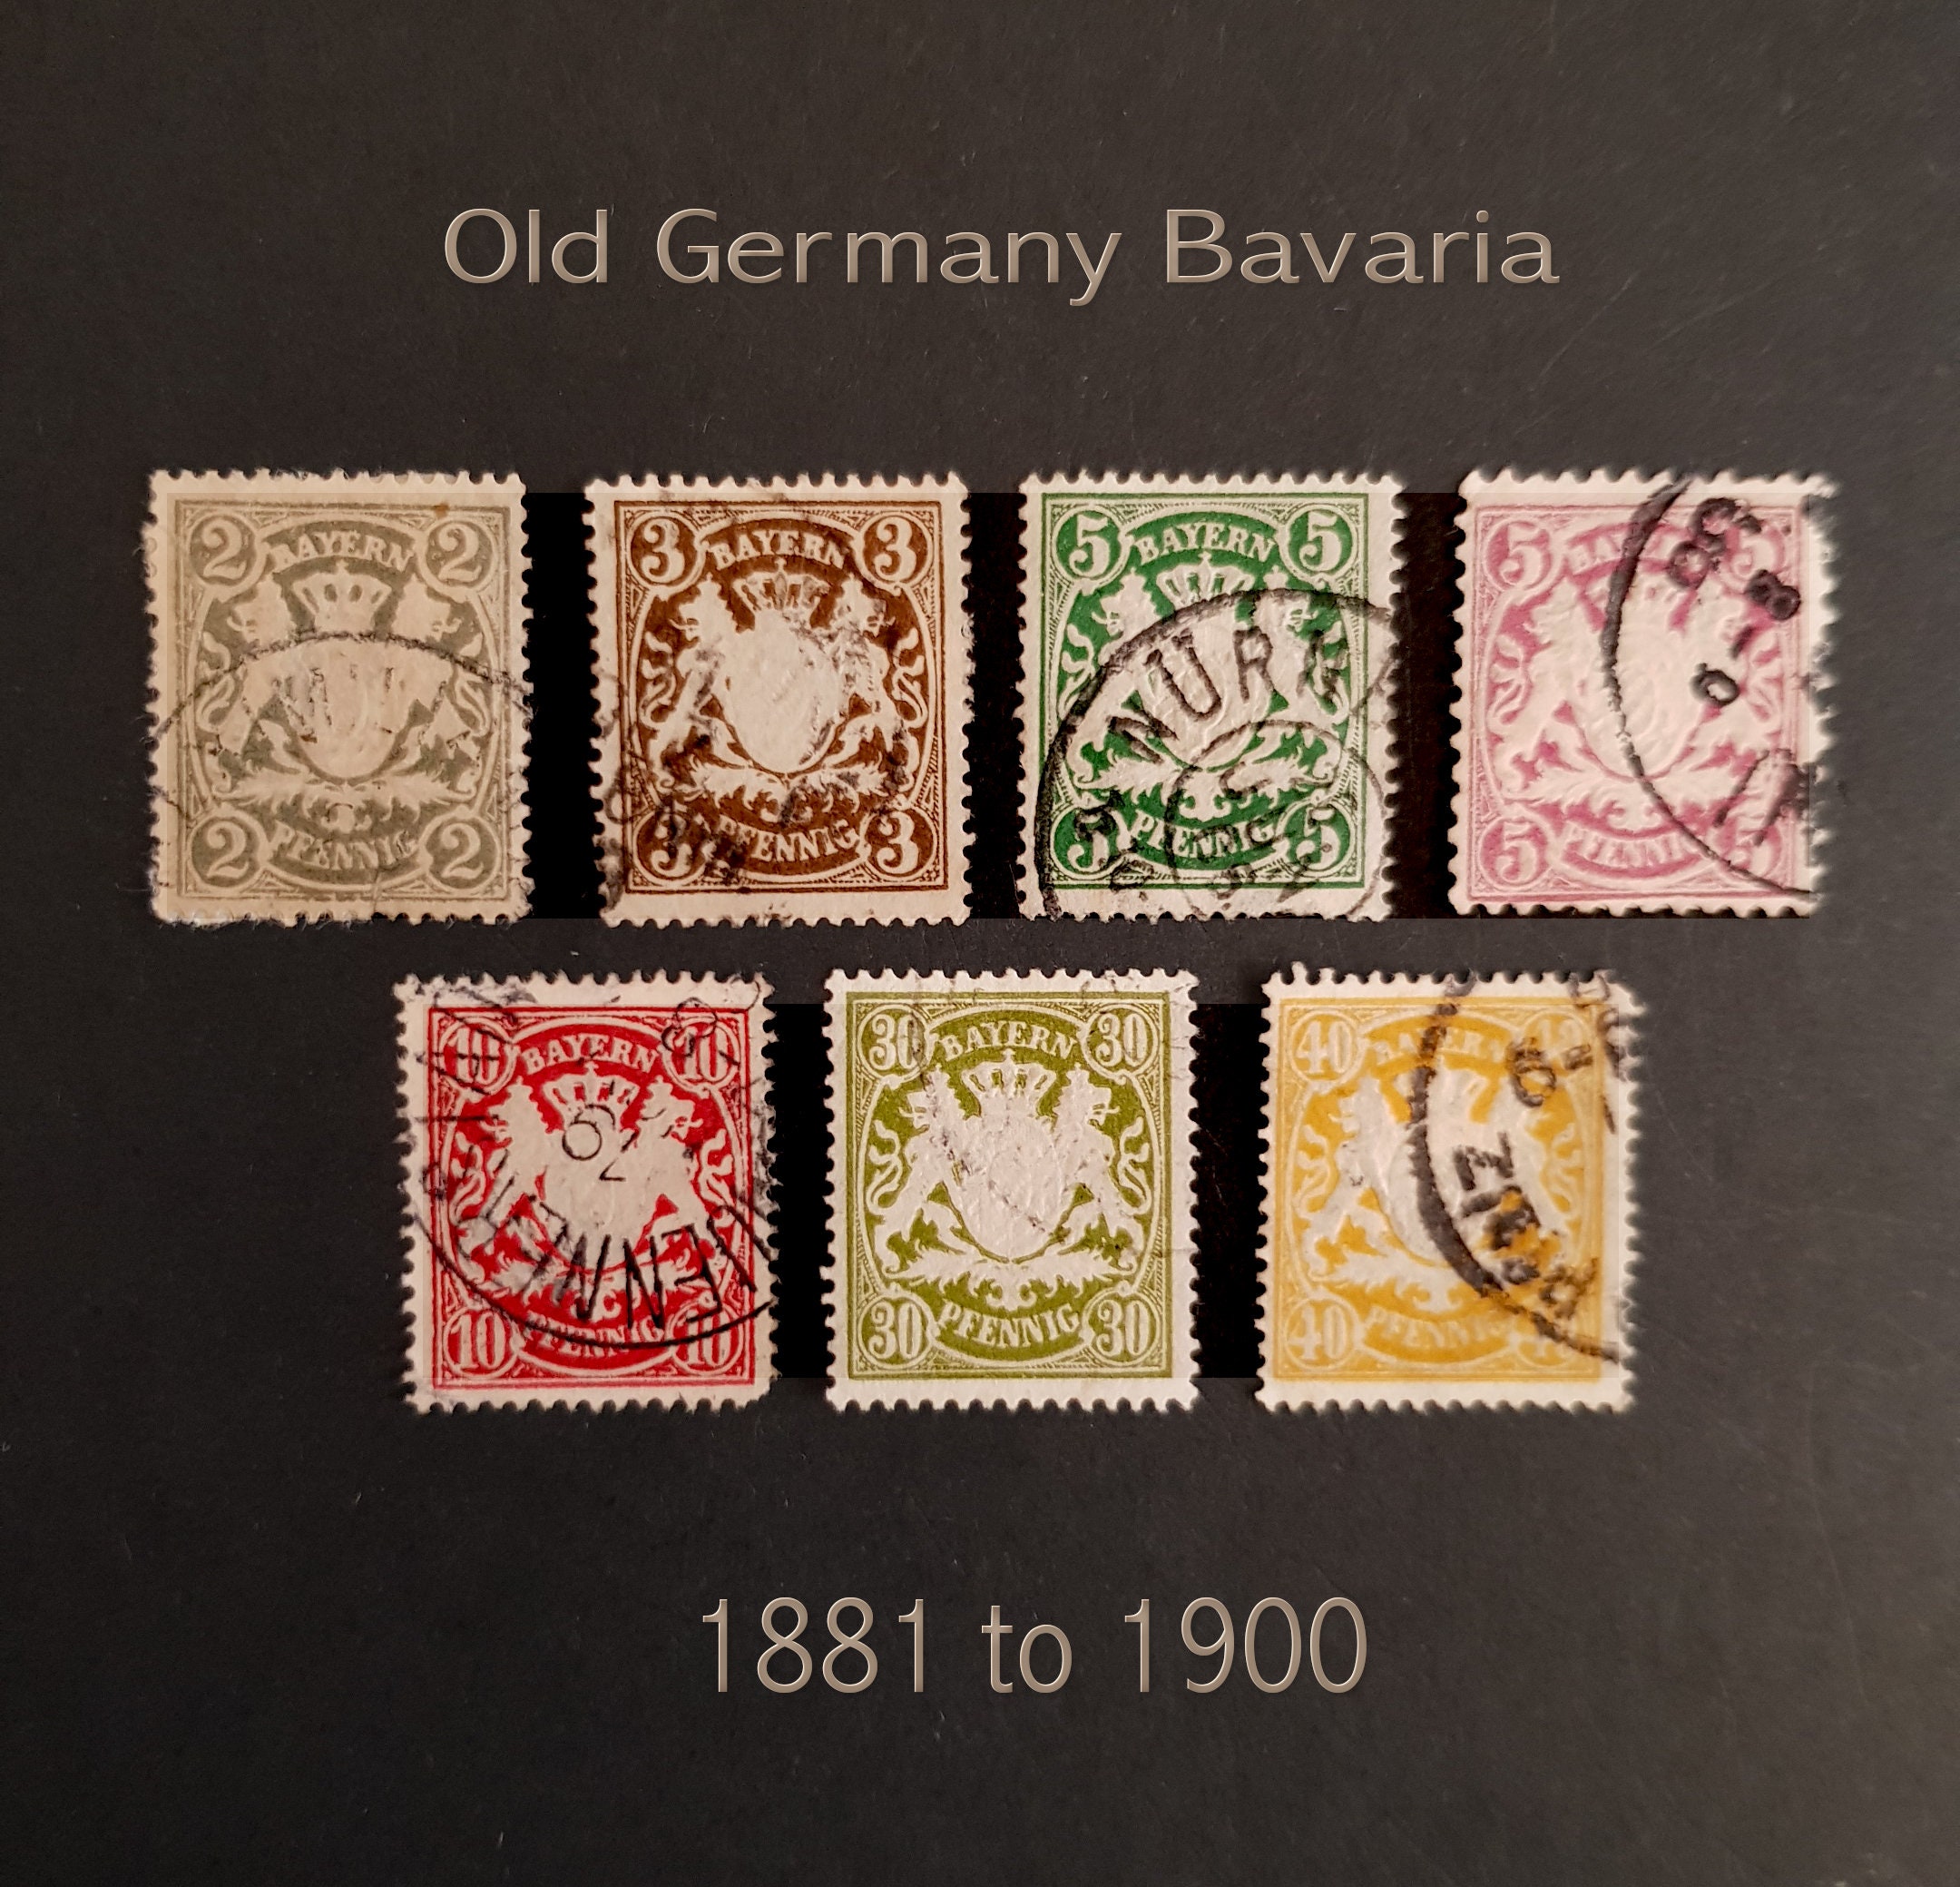 ANTIQUE RARE COLLECTIBLE SET OF BAYERN BAVARIA GERMANY POSTAGE STAMPS